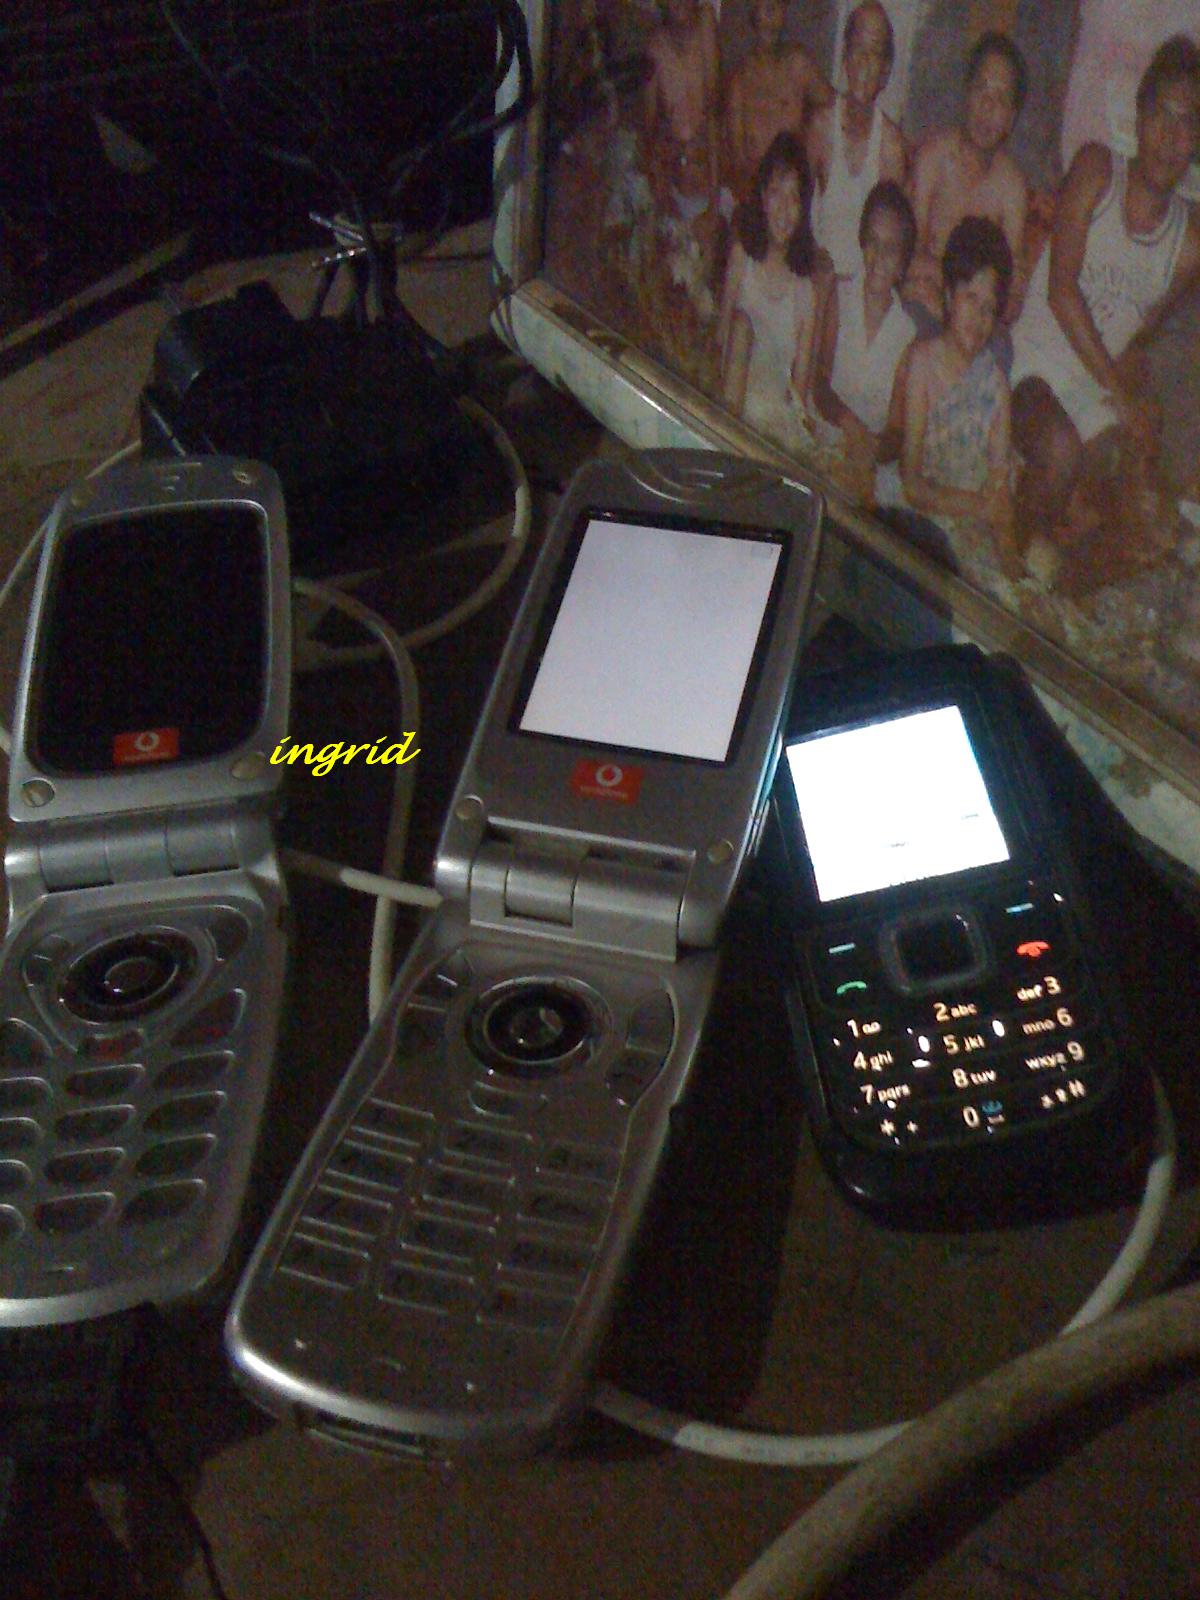 my old cell phones